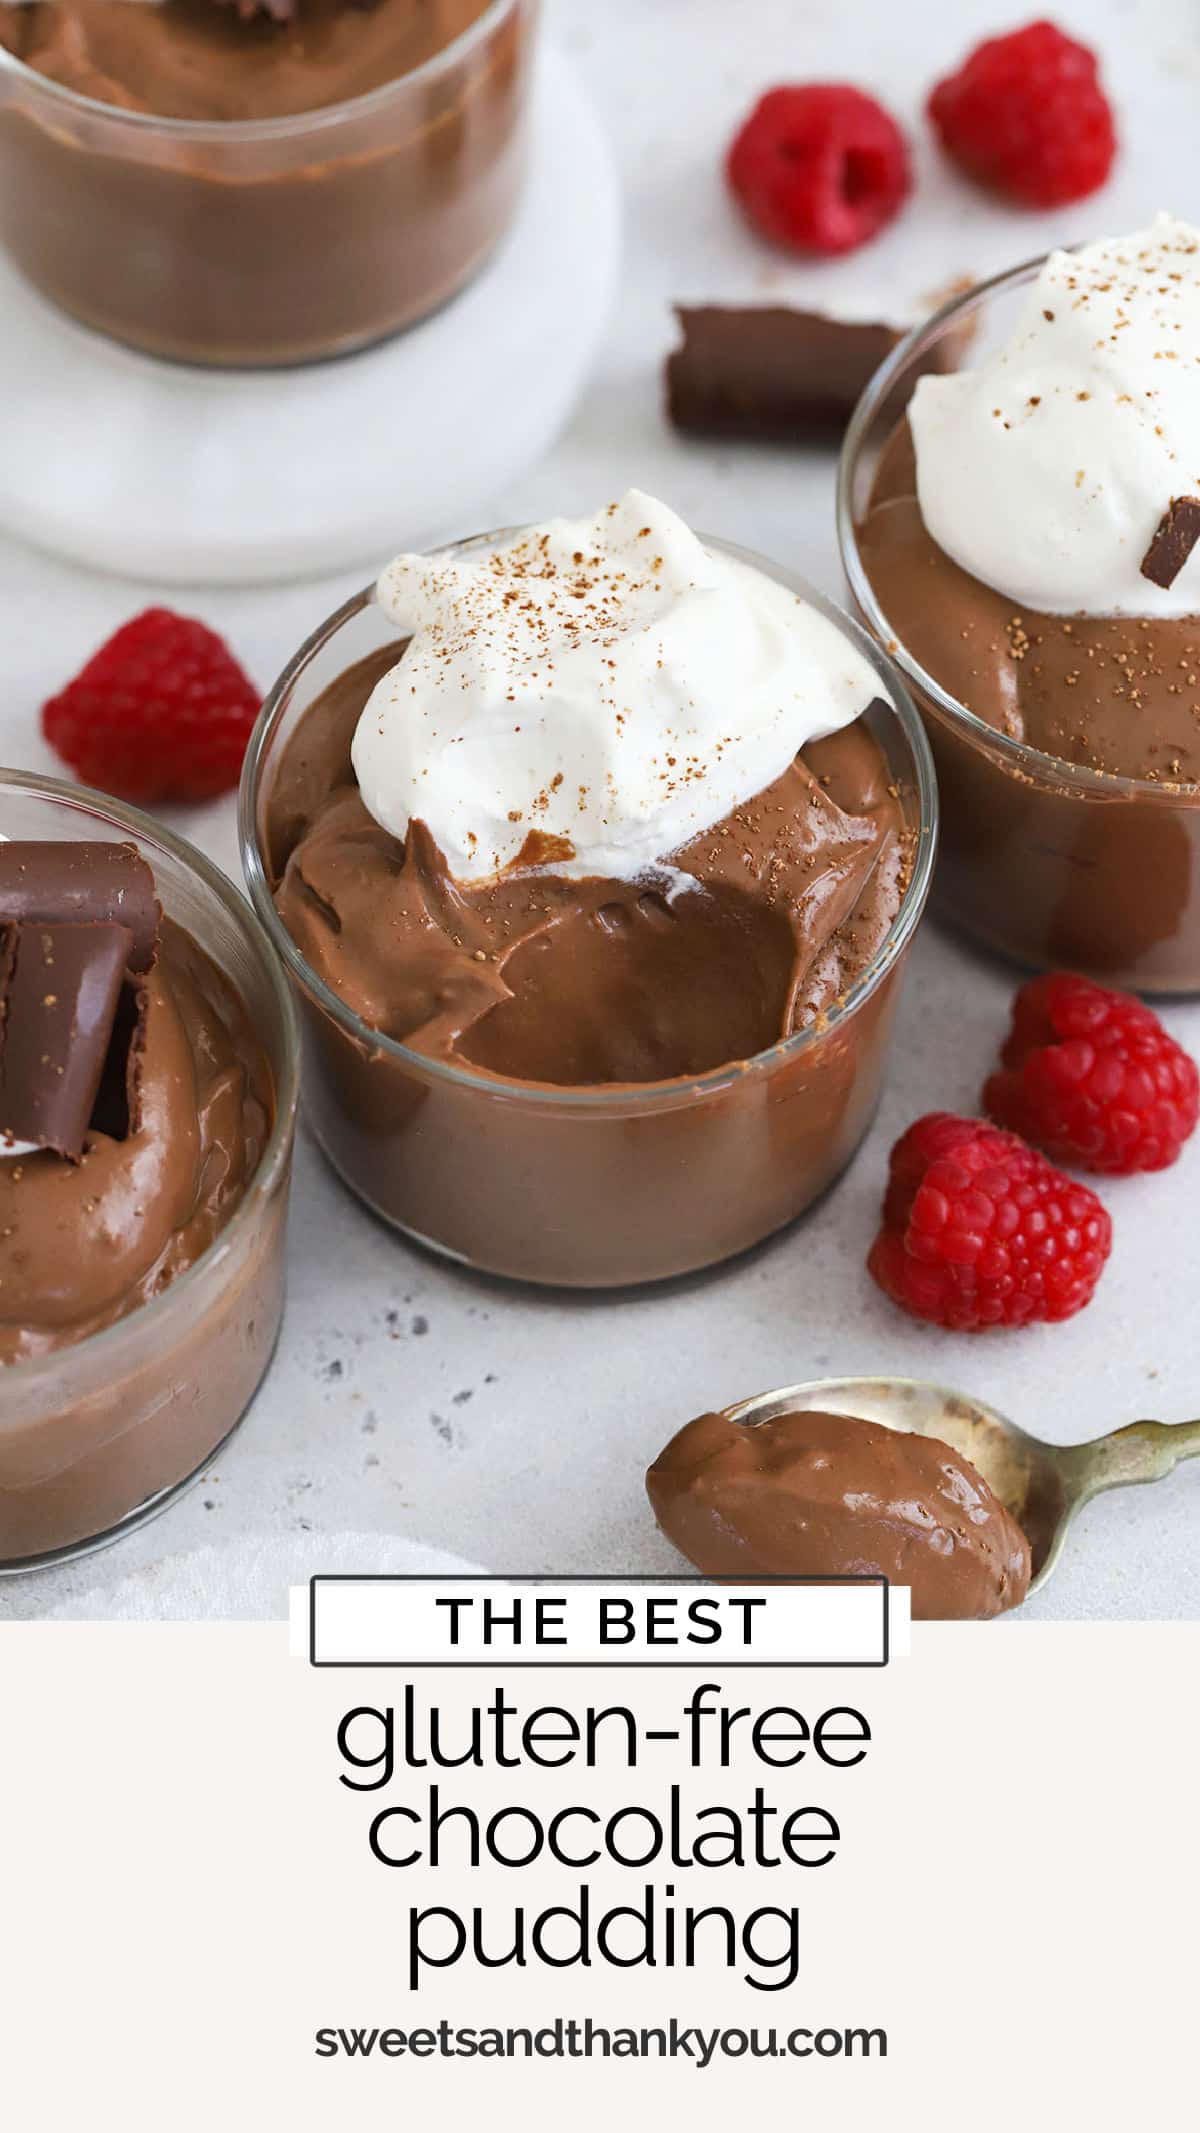 This easy homemade gluten-free chocolate pudding recipe is made from simple ingredients and tastes DELICIOUS! You'll love all the classic flavor in this easy recipe! / homemade chocolate pudding recipe / easy gluten free chocolate pudding recipe / no bake gluten free dessert / no bake chocolate pudding / gluten free pudding recipe / the best gluten free pudding / the best gluten-free chocolate pudding recipe/